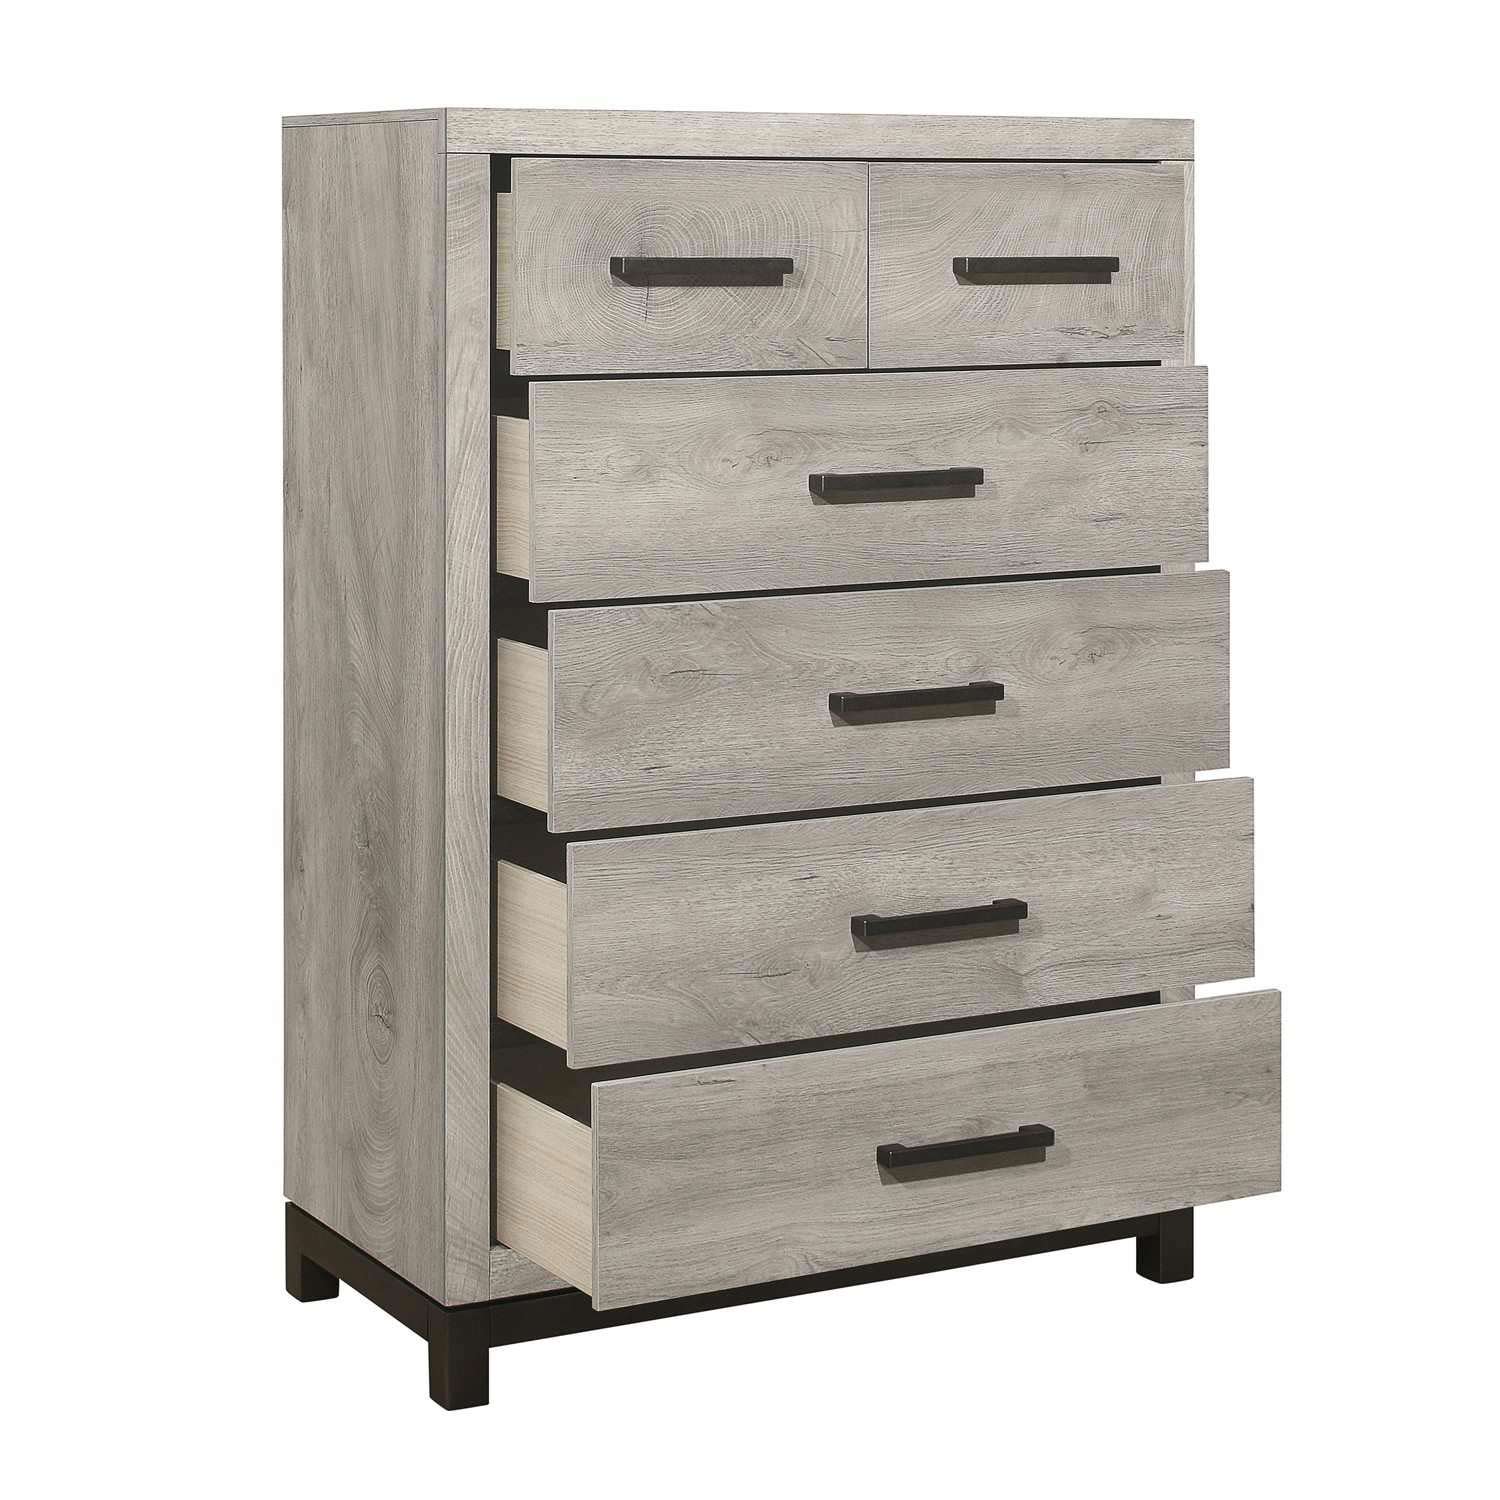 Homelegance Zephyr Chest - Two-tone : Light Gray And Gray